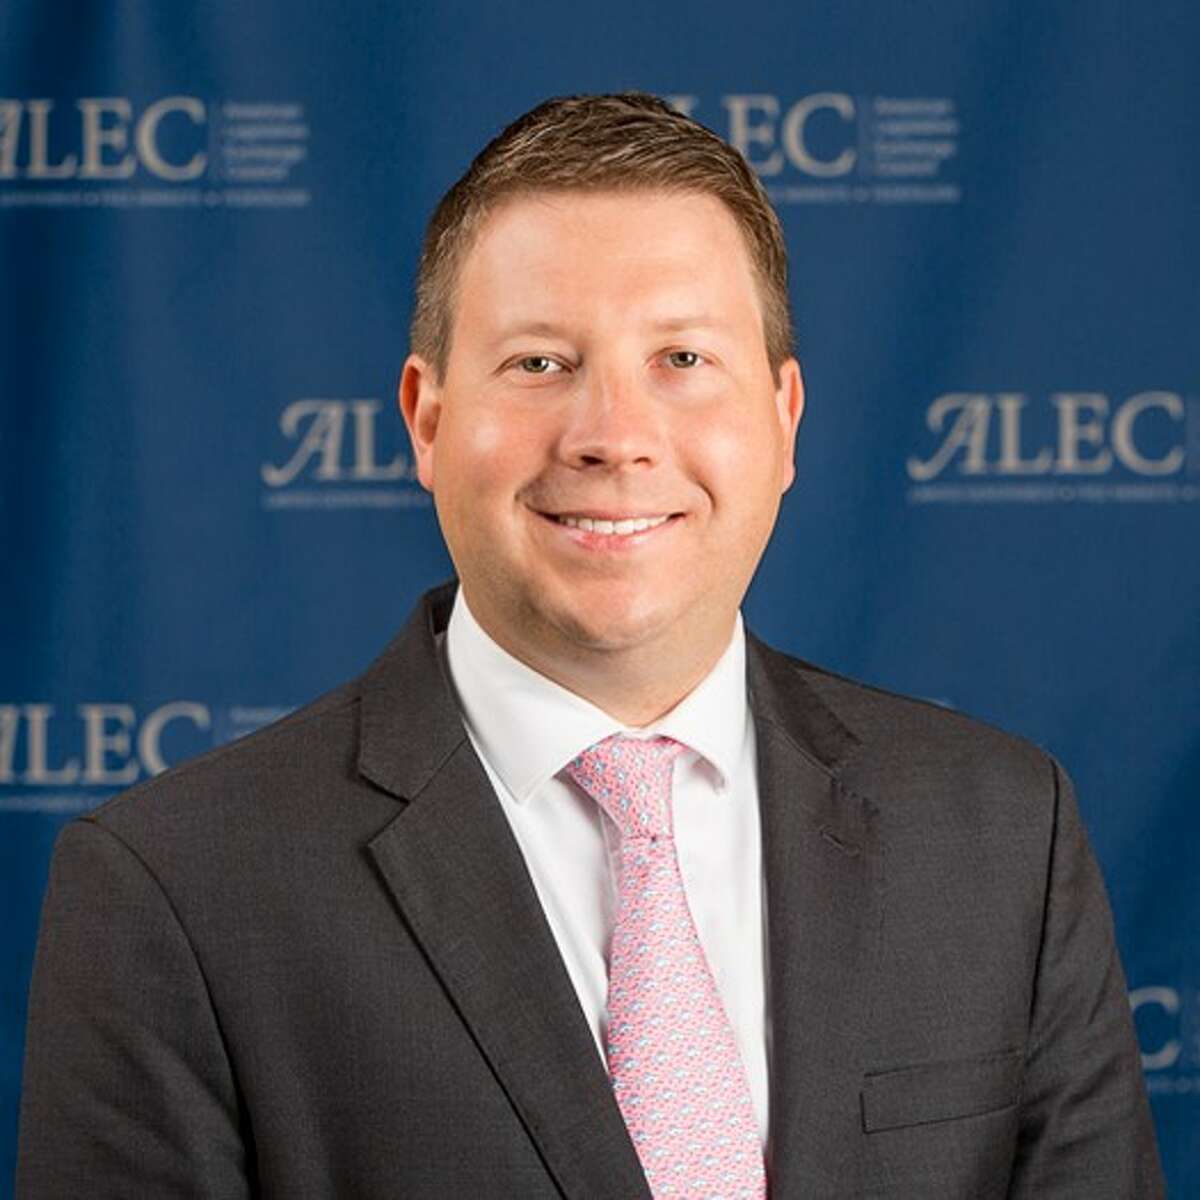 Jonathan Williams is the chief economist and executive vice president of policy at the American Legislative Exchange Council (ALEC), where he works with state policymakers, congressional leaders and members of the private sector to develop fiscal policy solutions for the states. 